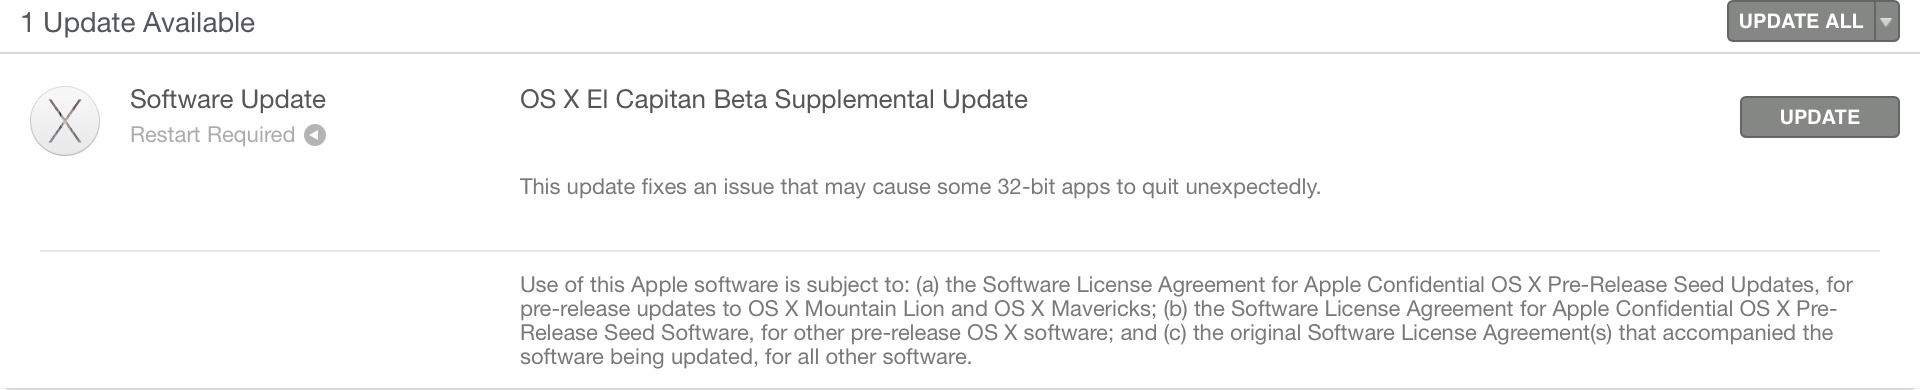 Apple releases complementary update for those testing OS X El Capitan 10.11